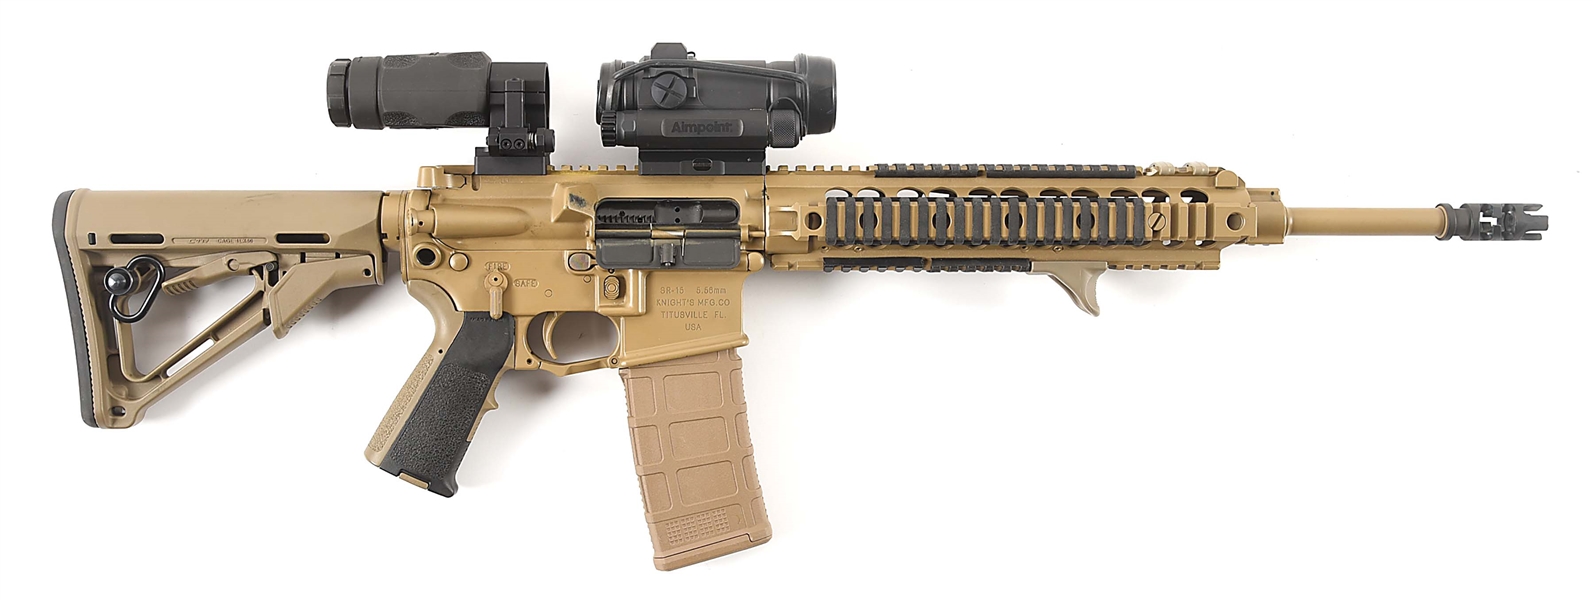 (M) KNIGHTS ARMAMENT SR-15 5.56X45MM SEMI-AUTOMATIC RIFLE WITH AIMPOINT COMP M4, MAGNIFIER, AND CASE.